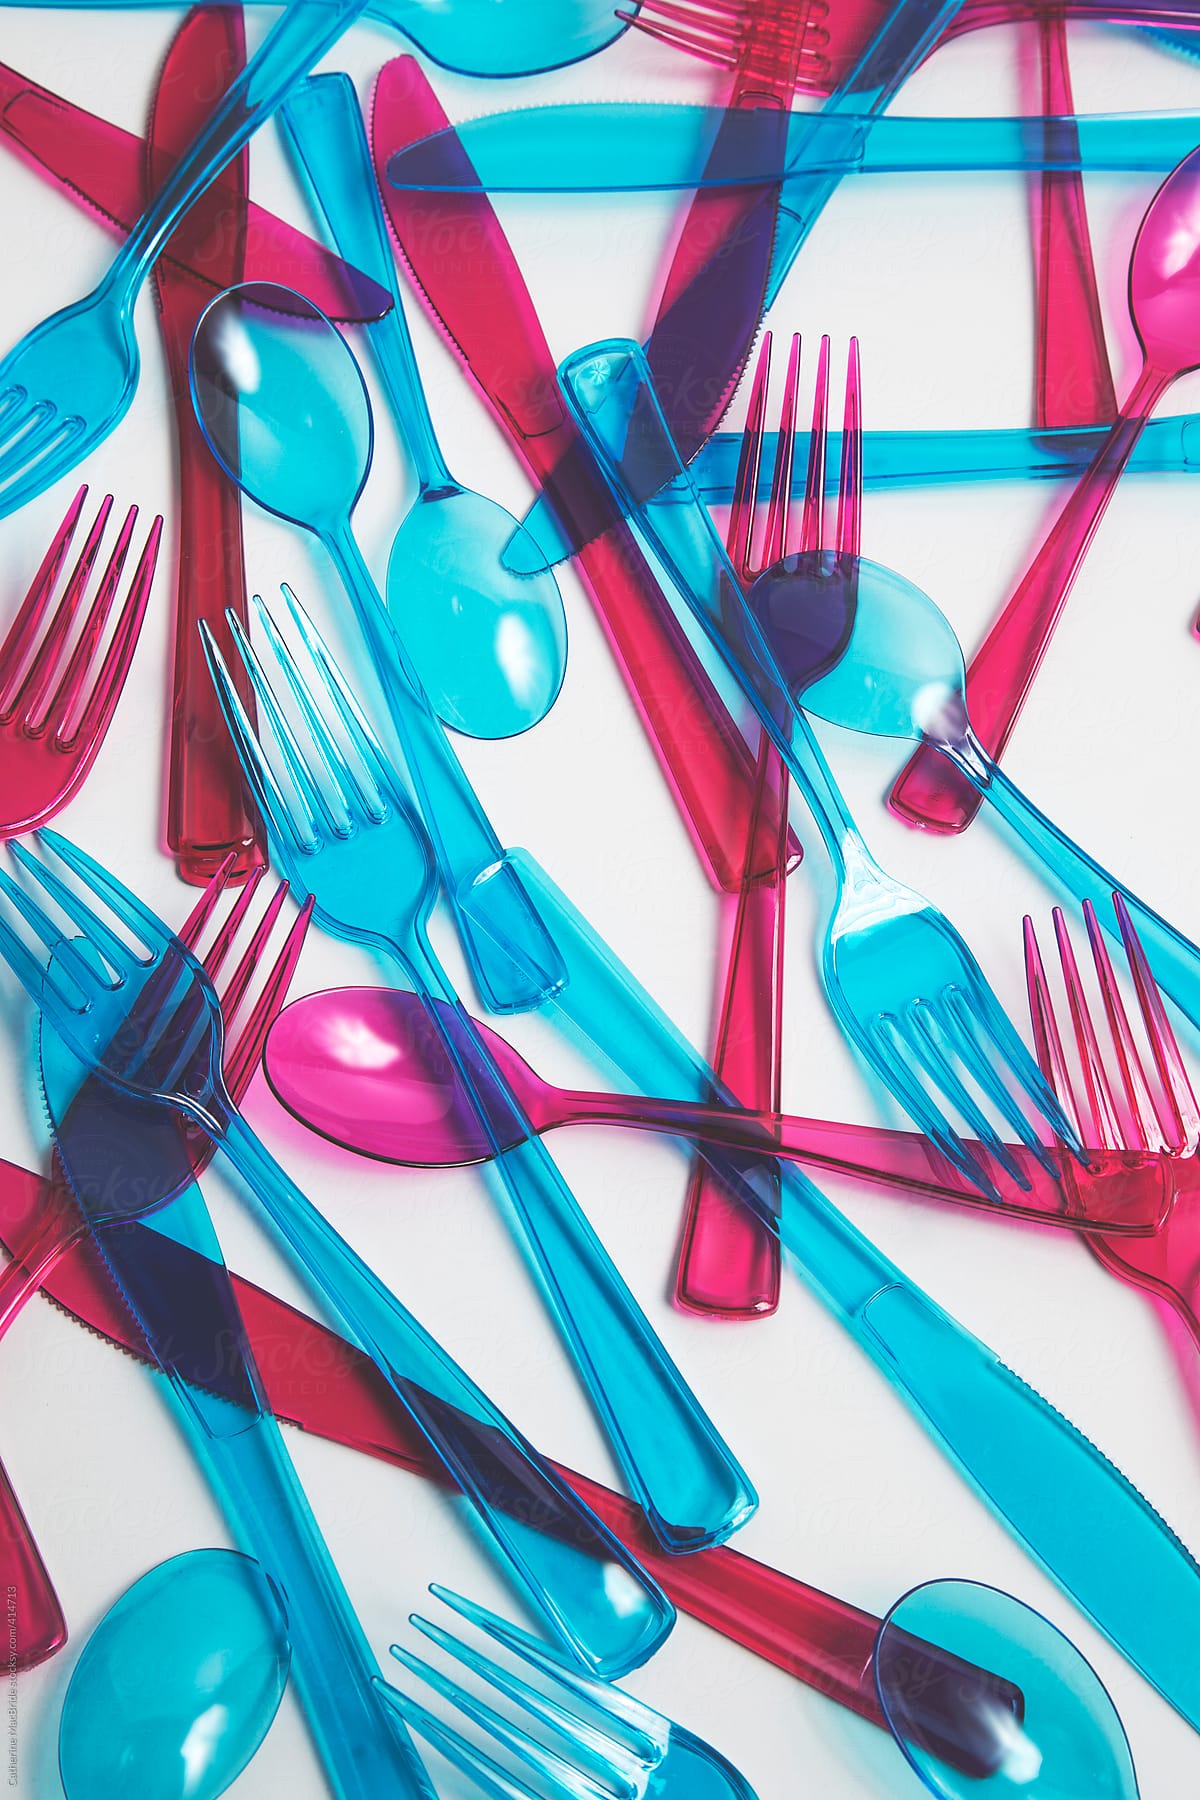 Dark Pink and Blue plastic cutlery...